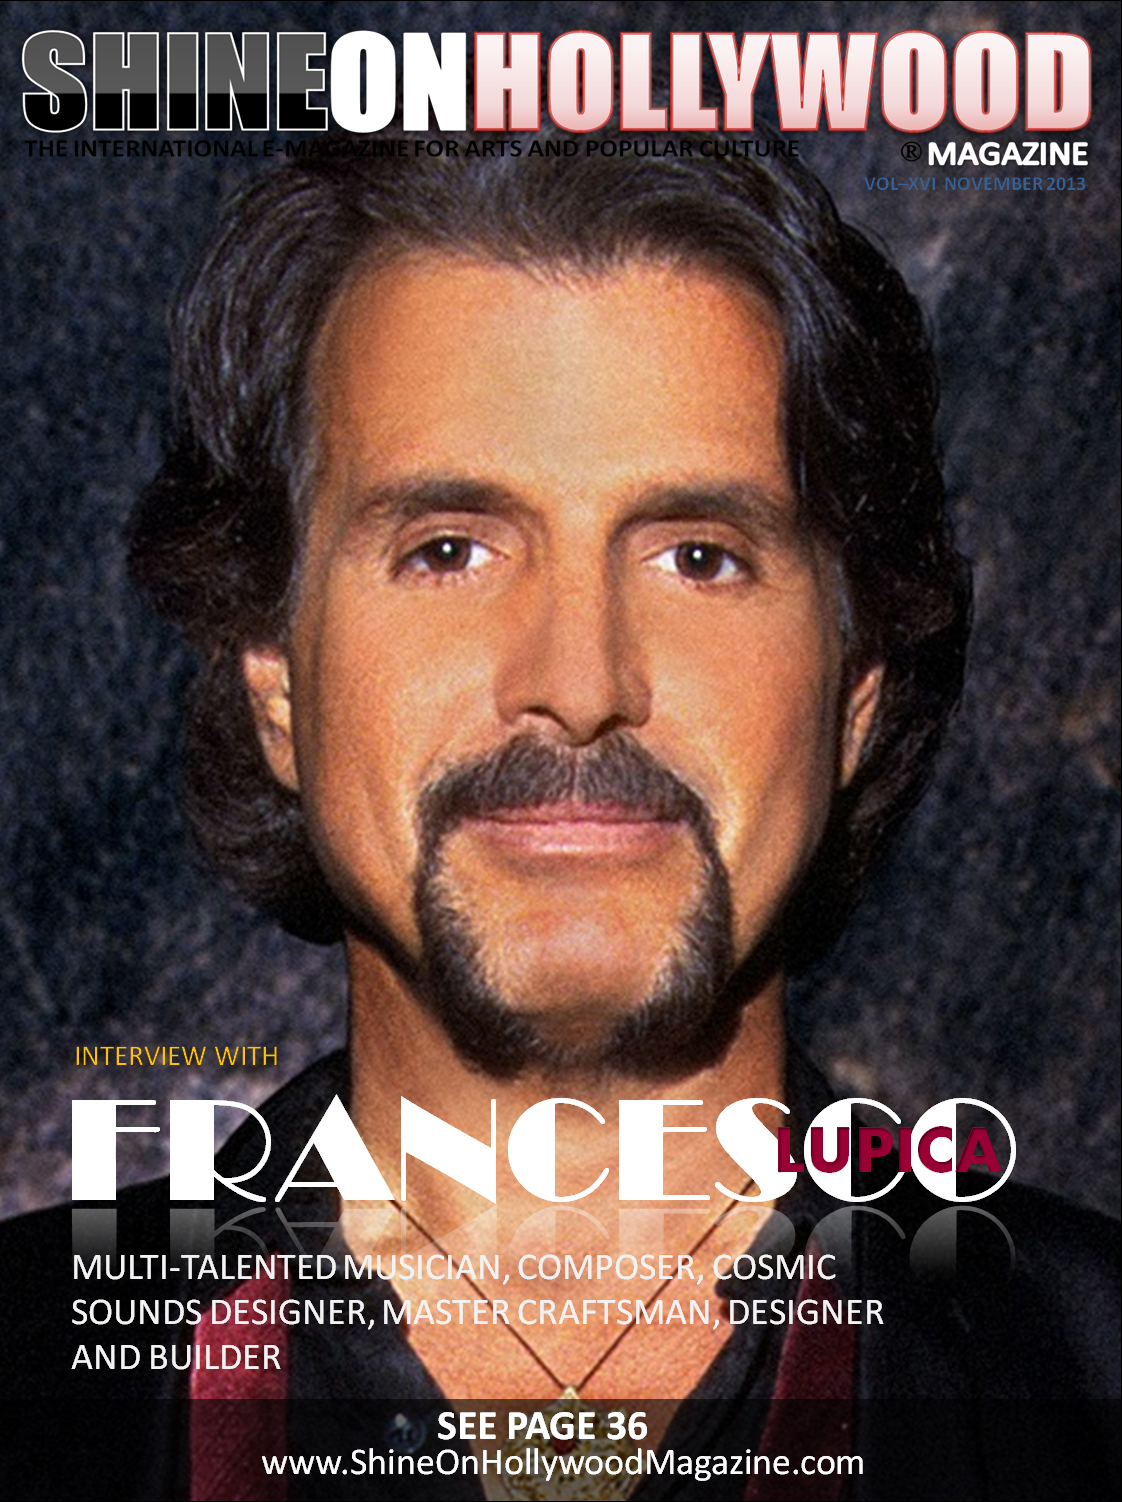 There is a 9 page article about Francesco's Music and his journey to Hollywood in the November Issue of Shine ON Hollywood Magazine. This is an on line magazine.